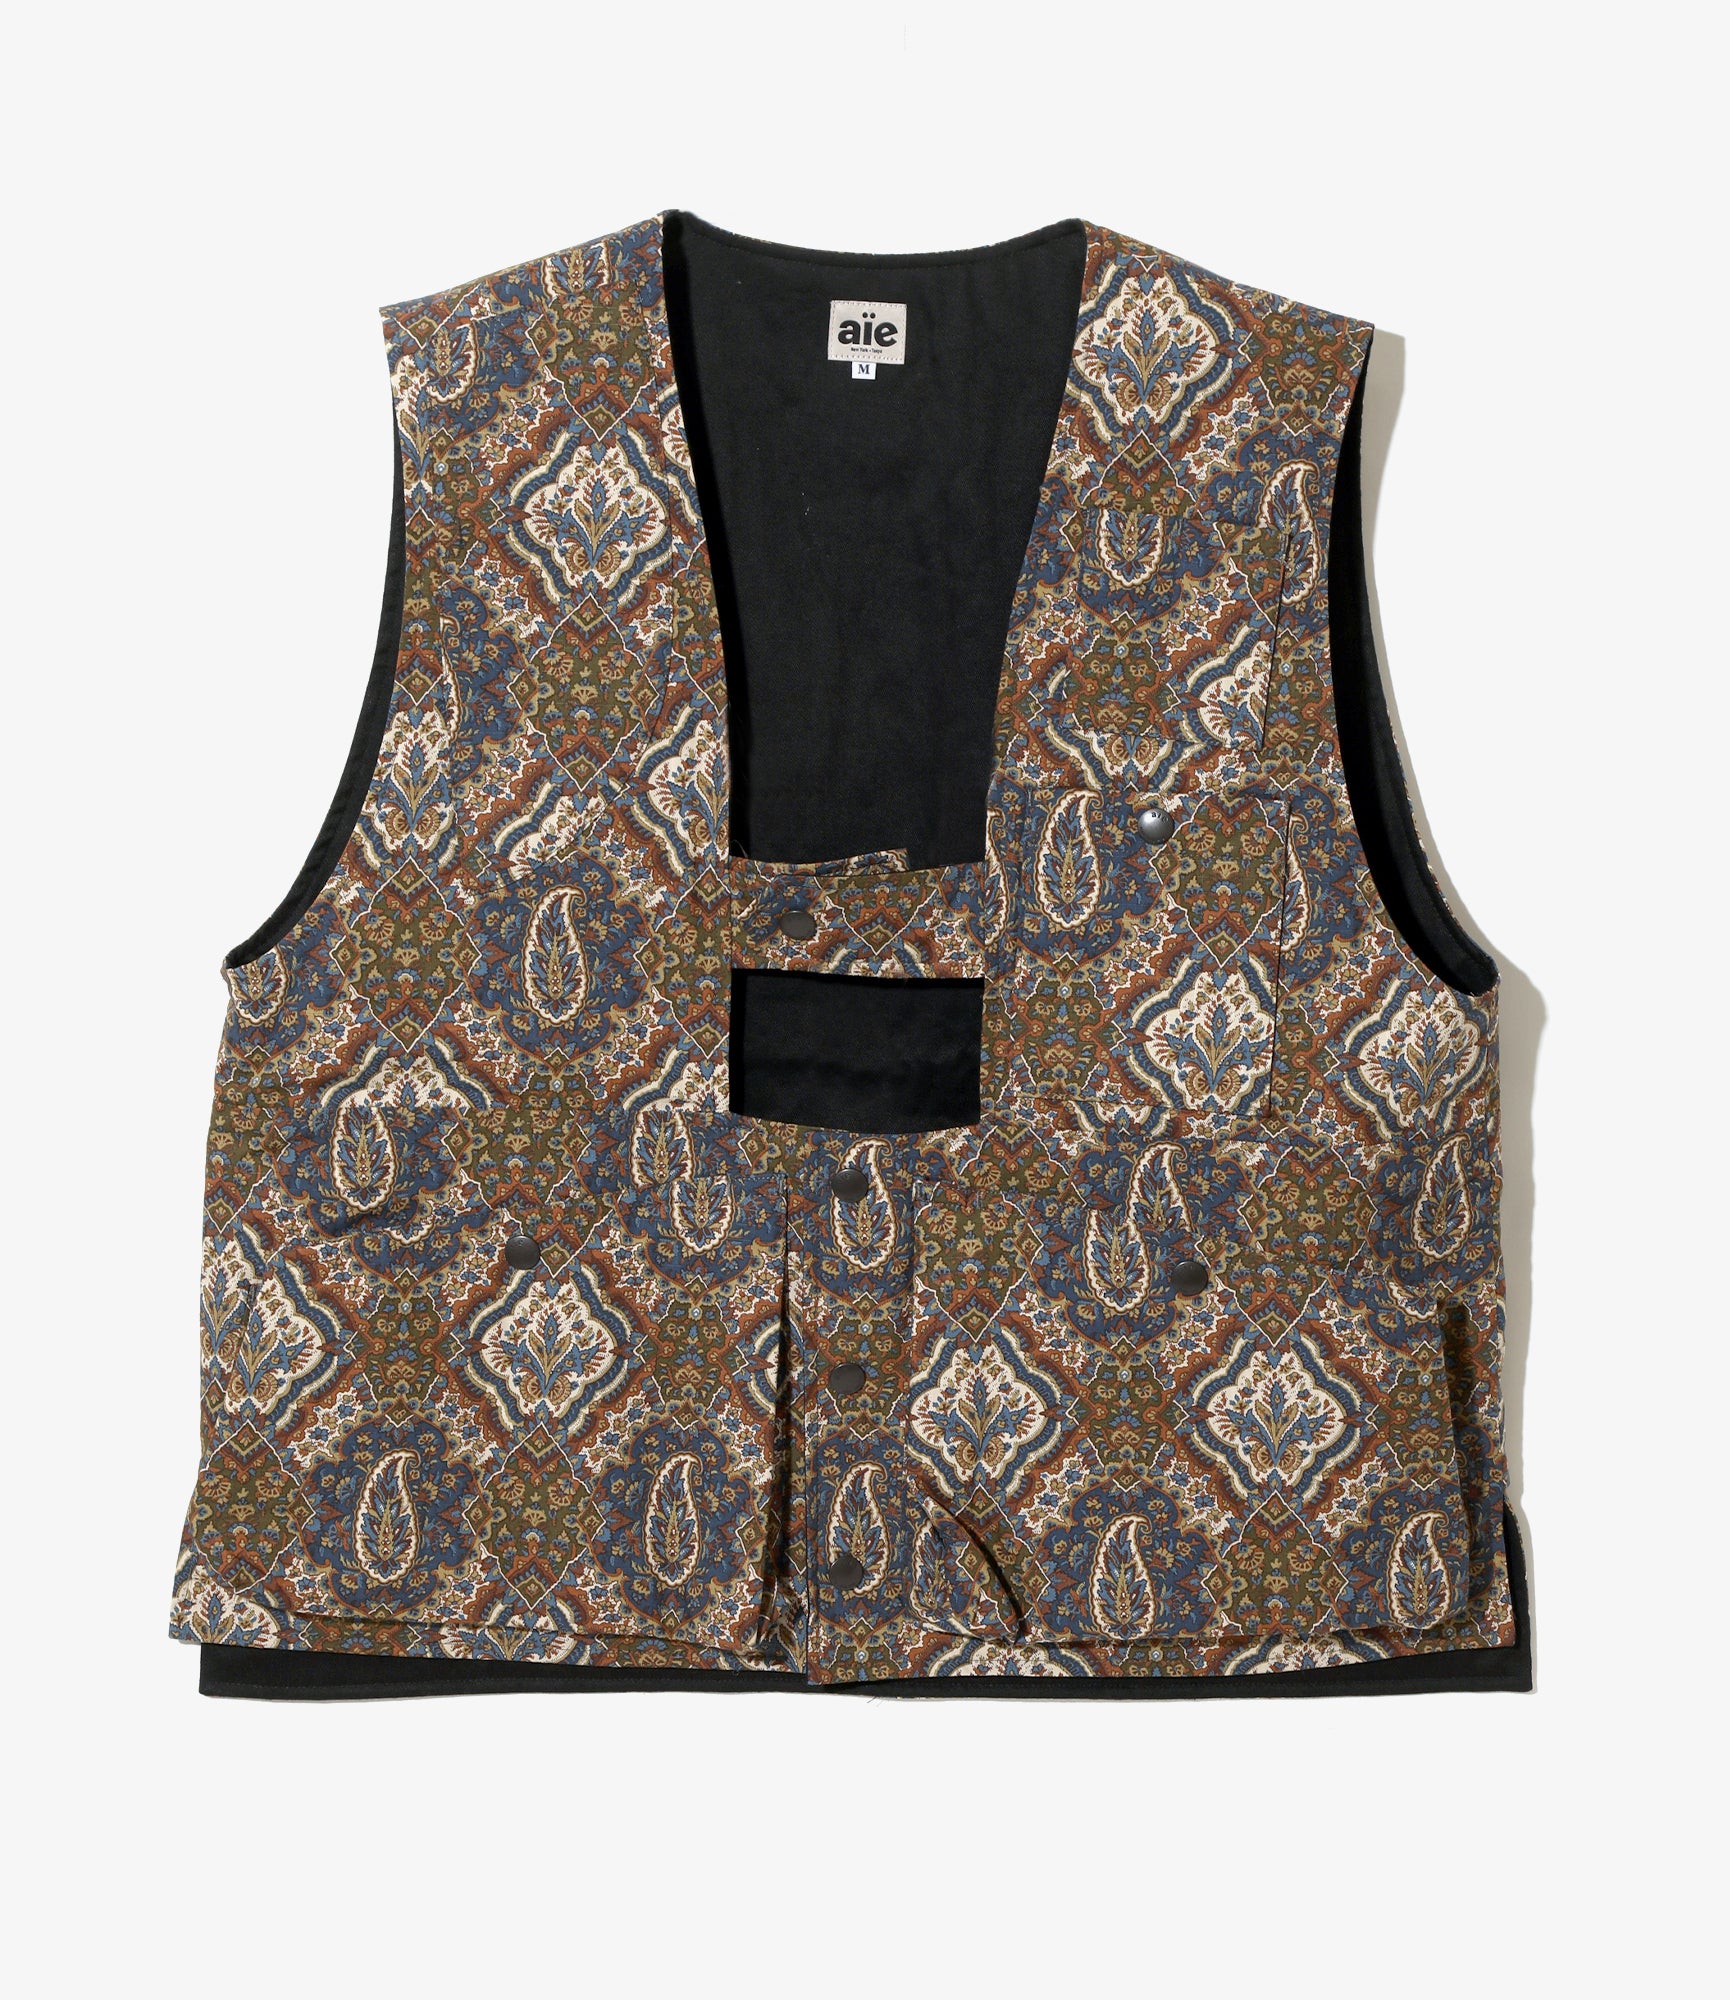 Game Vest - Beige - Cotton Ripstop / Liberty Printed